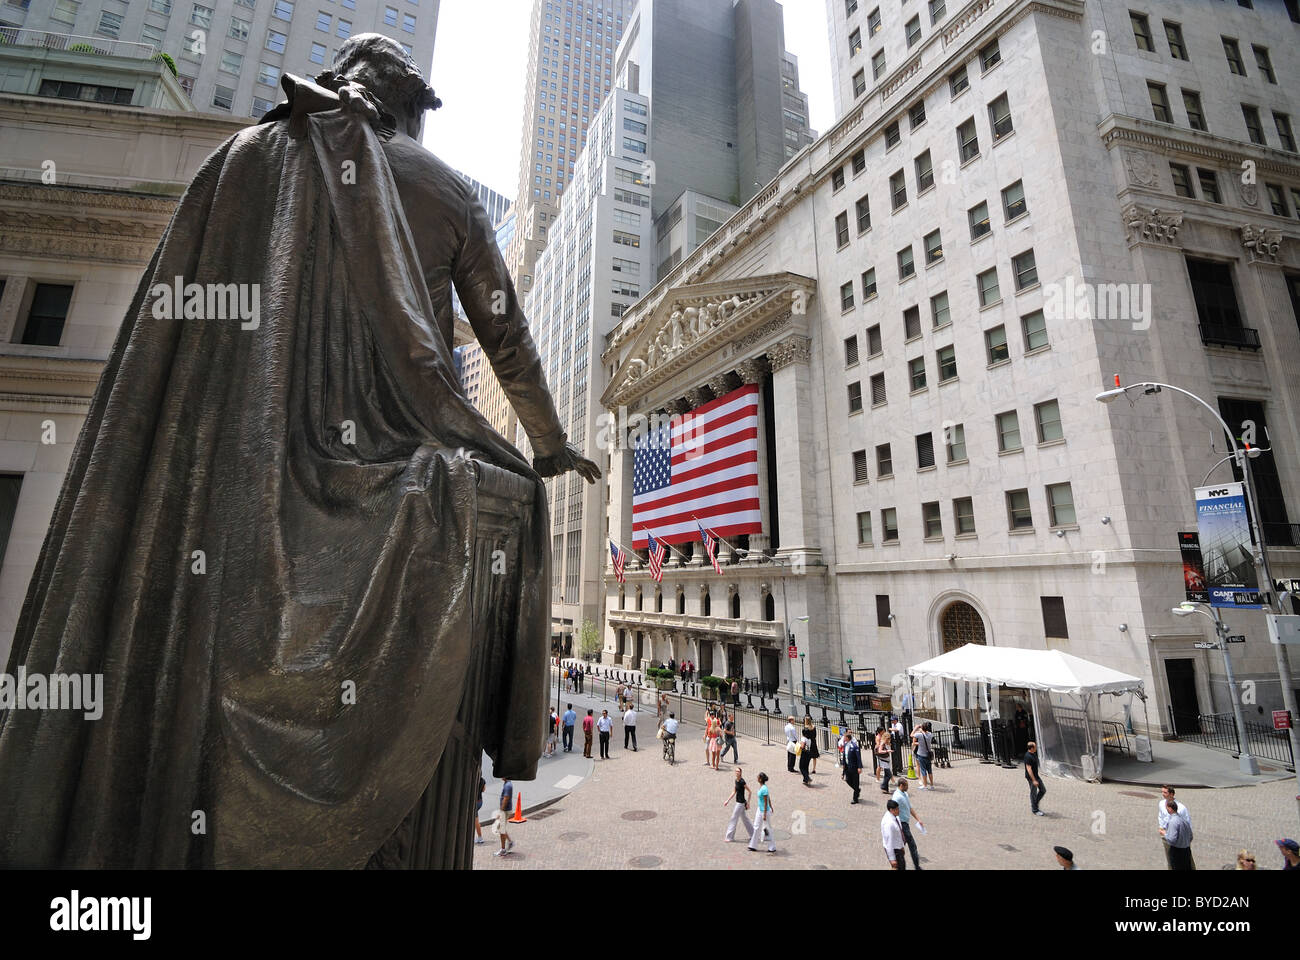 A view from Federal Hall and the Statue of George Washington looking towards the Stock Exchange on Wall Street. June 6, 2010. Stock Photo